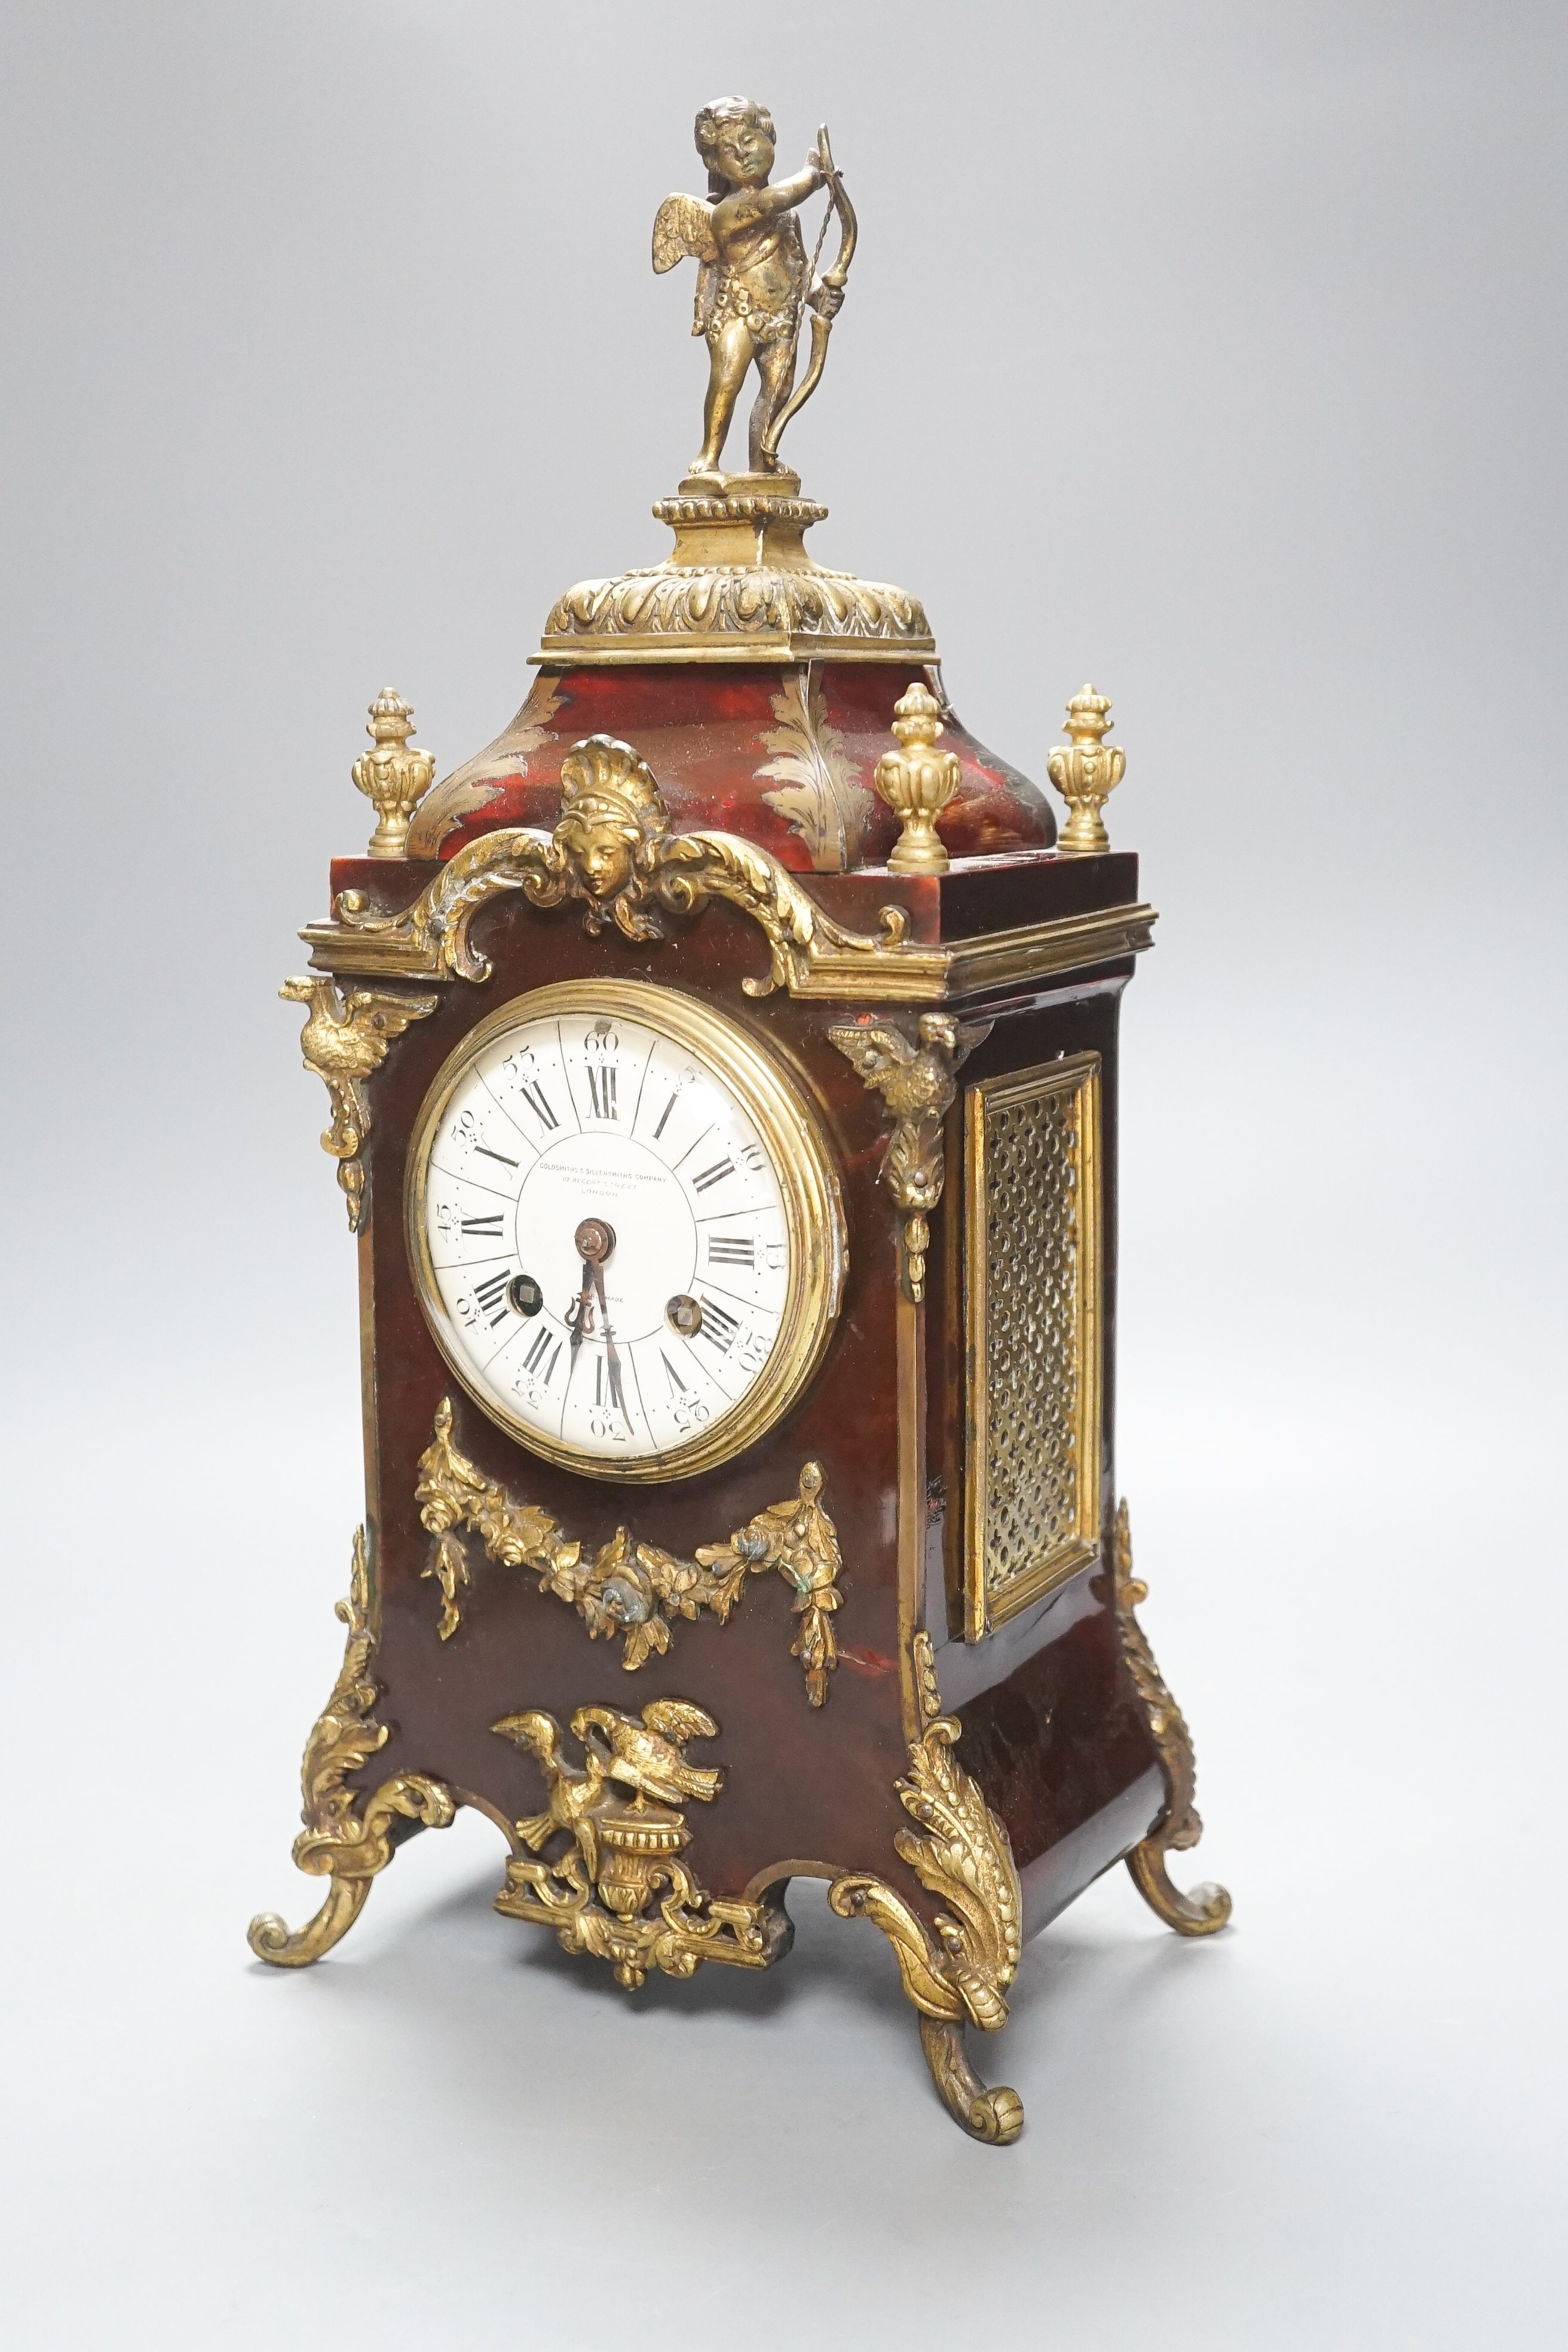 A 19th century French tortoiseshell and gilt metal mounted clock with key and pendulum 40cm